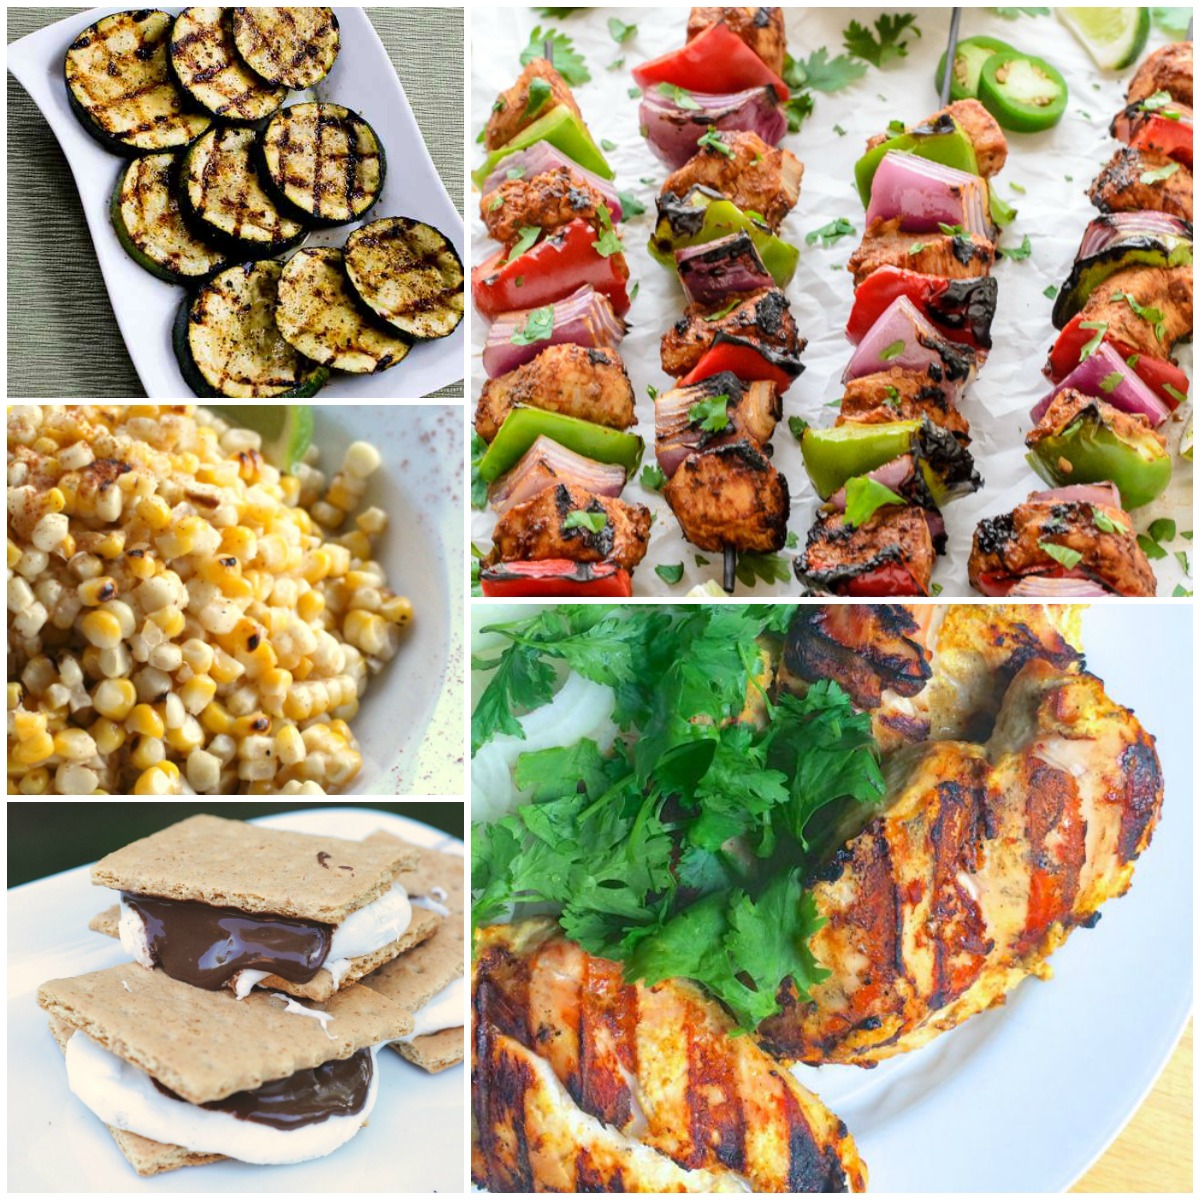 25 of the best grilling recipes